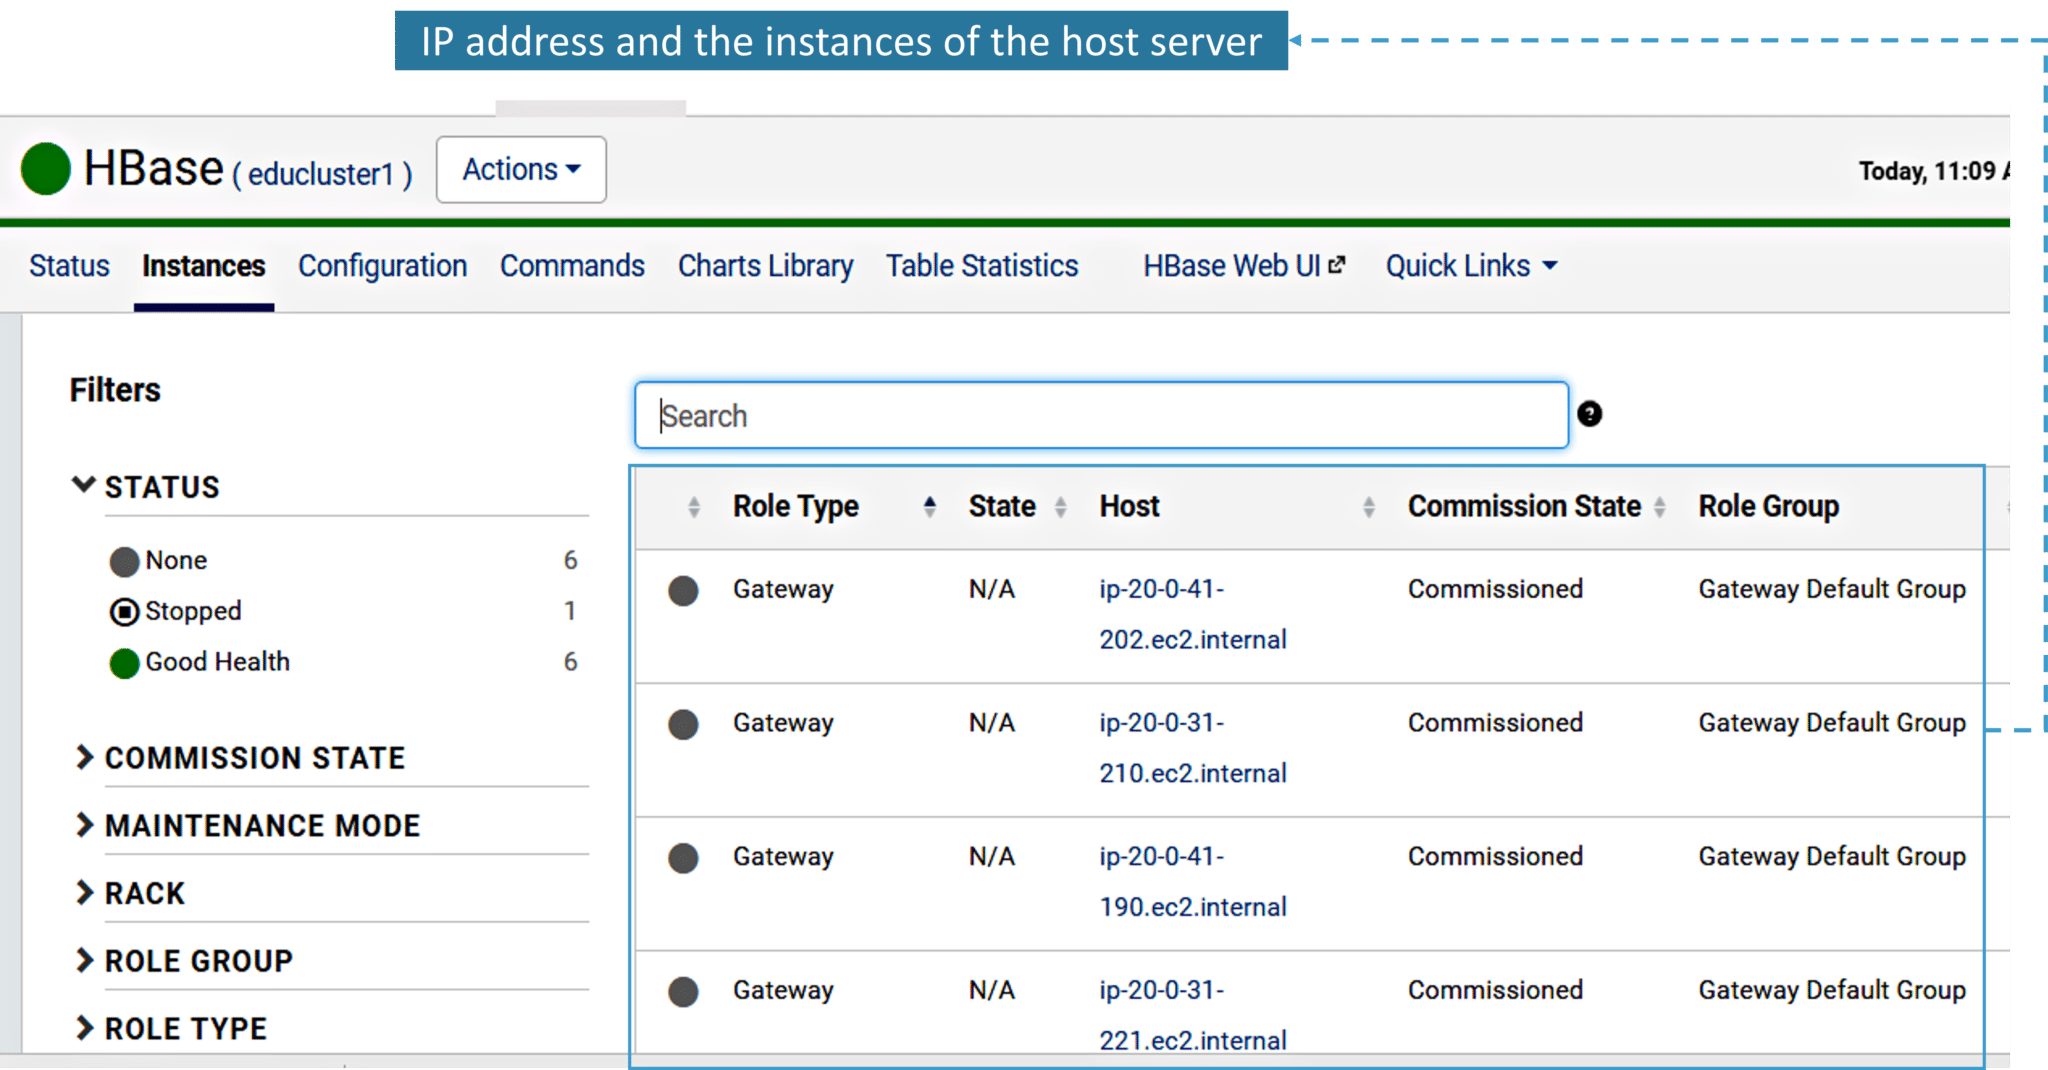 Fig: Status and IP address of the Host Server of the HBase cluster